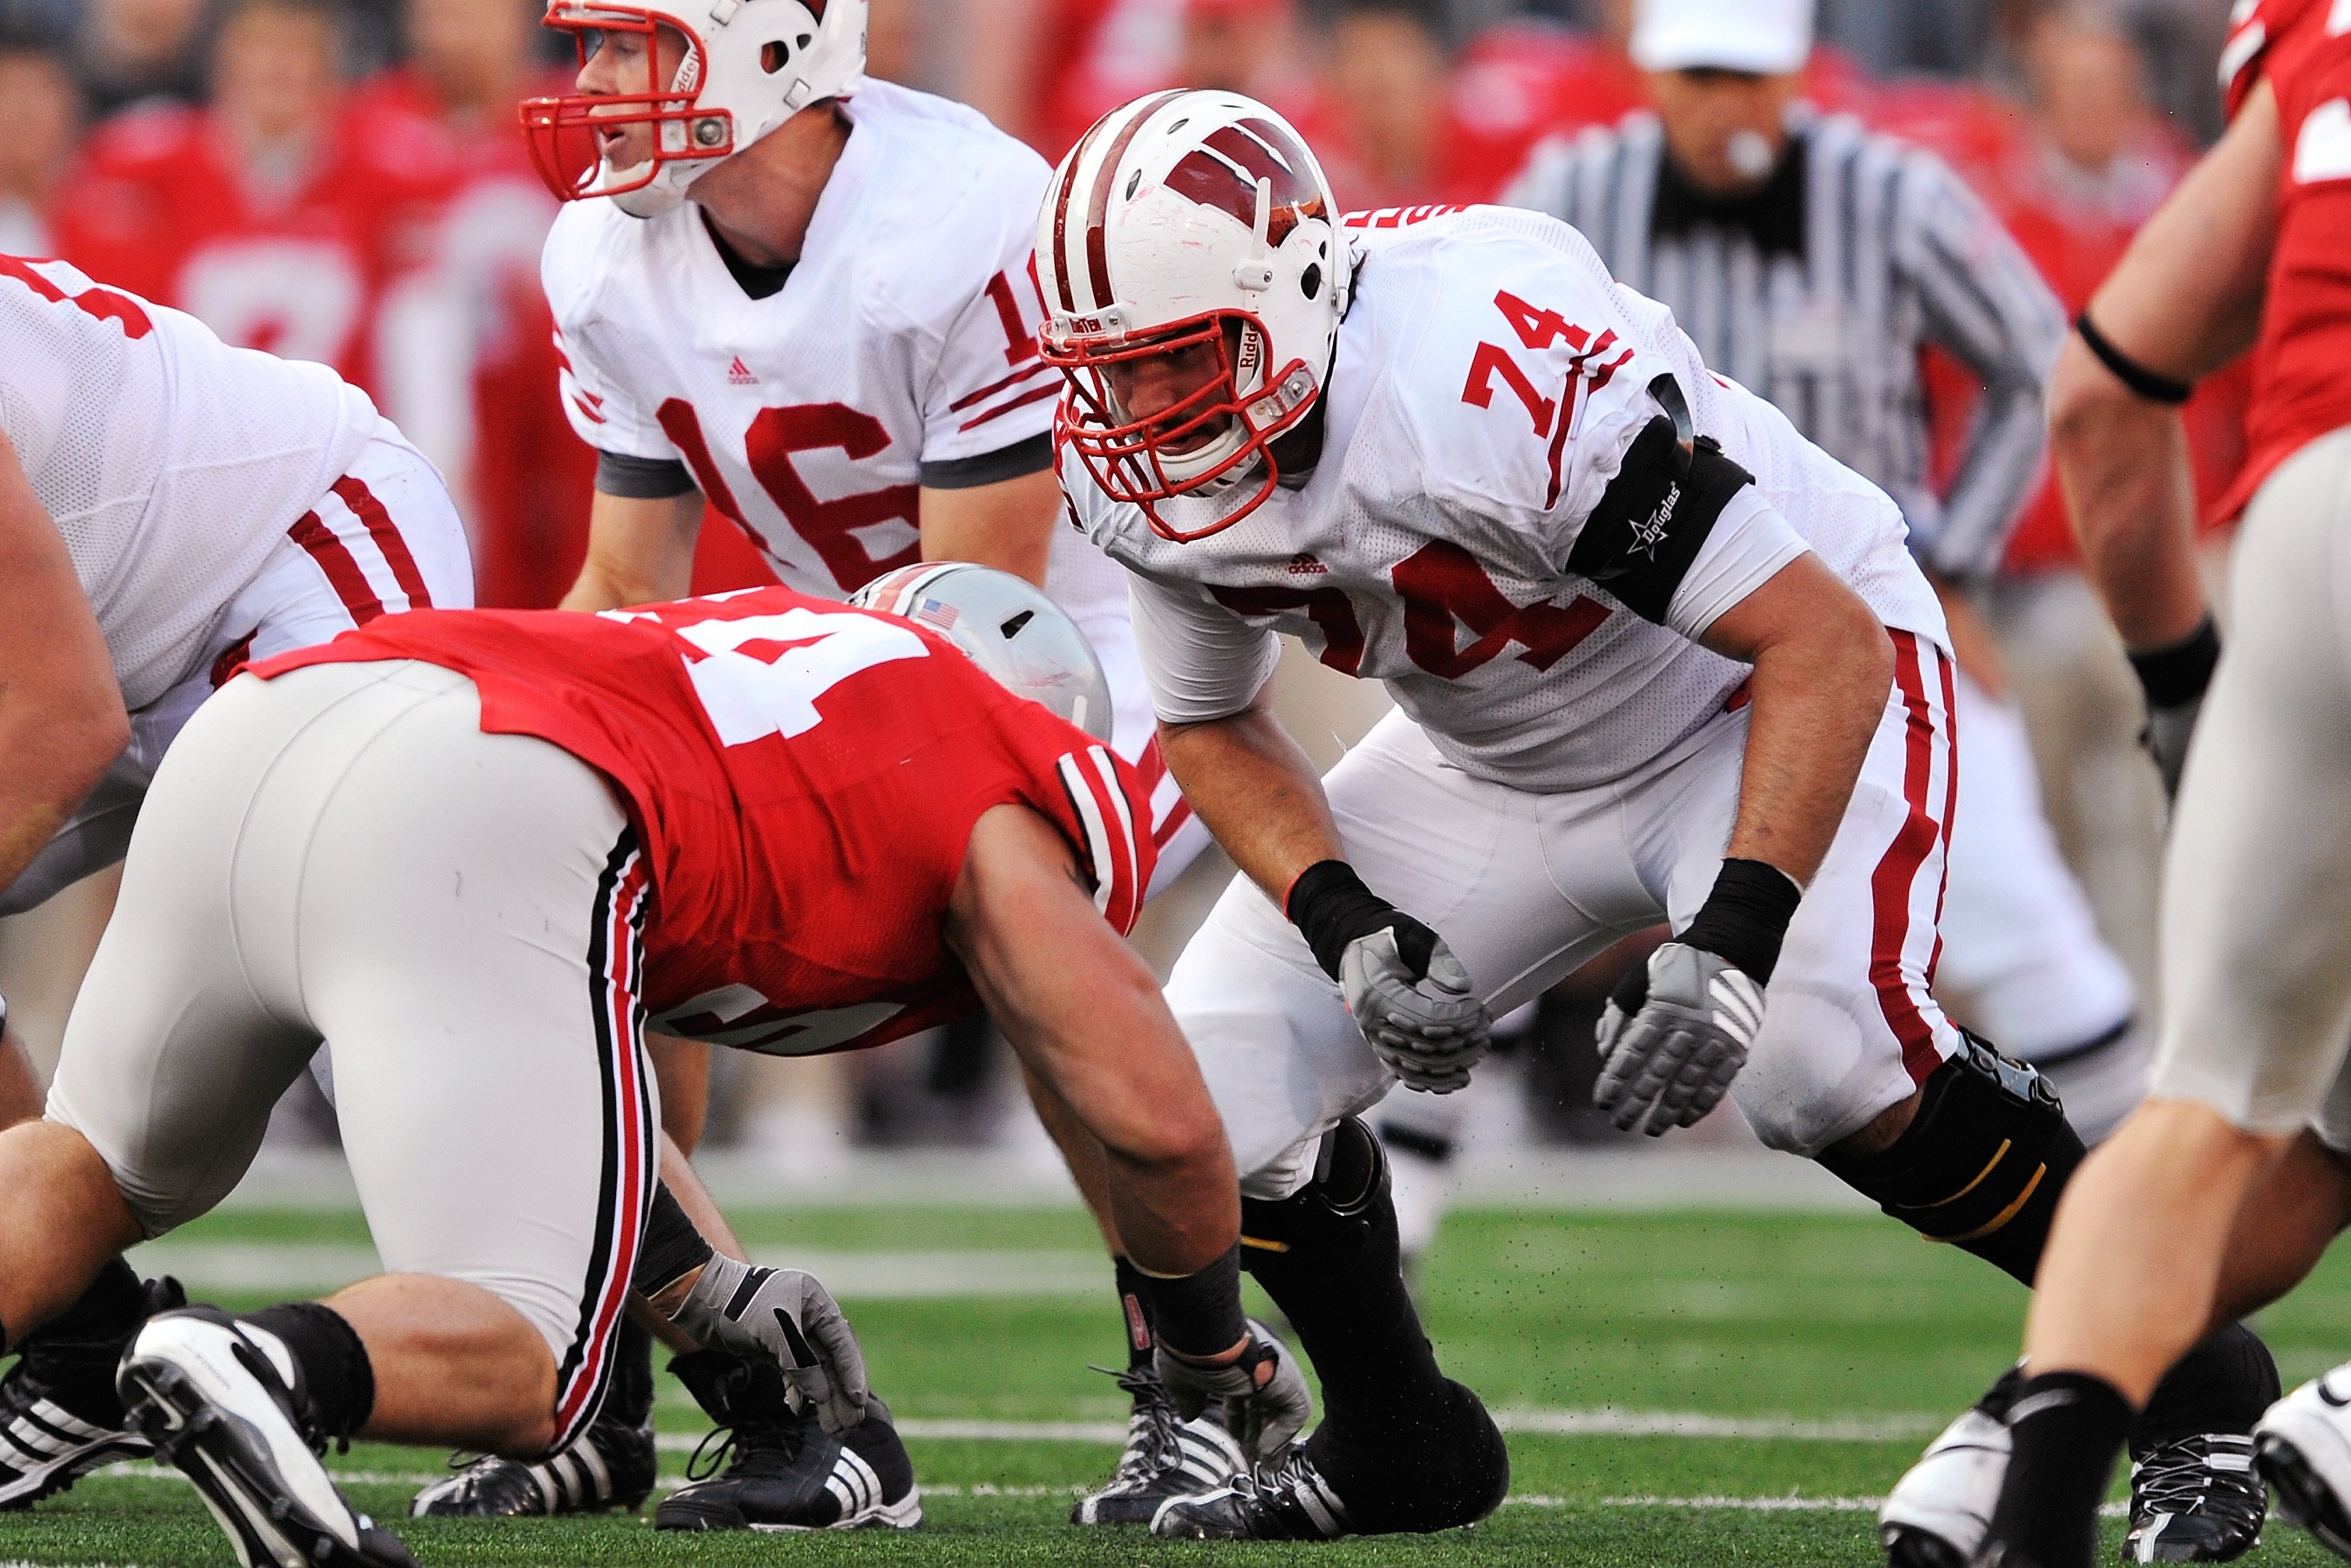 COLUMBUS, OH - OCTOBER 10:  Offensive lineman John Moffitt #74 of the Wisconsin Badgers blocks against the Ohio State Buckeyes at Ohio Stadium on October 10, 2009 in Columbus, Ohio.  (Photo by Jamie Sabau/Getty Images)